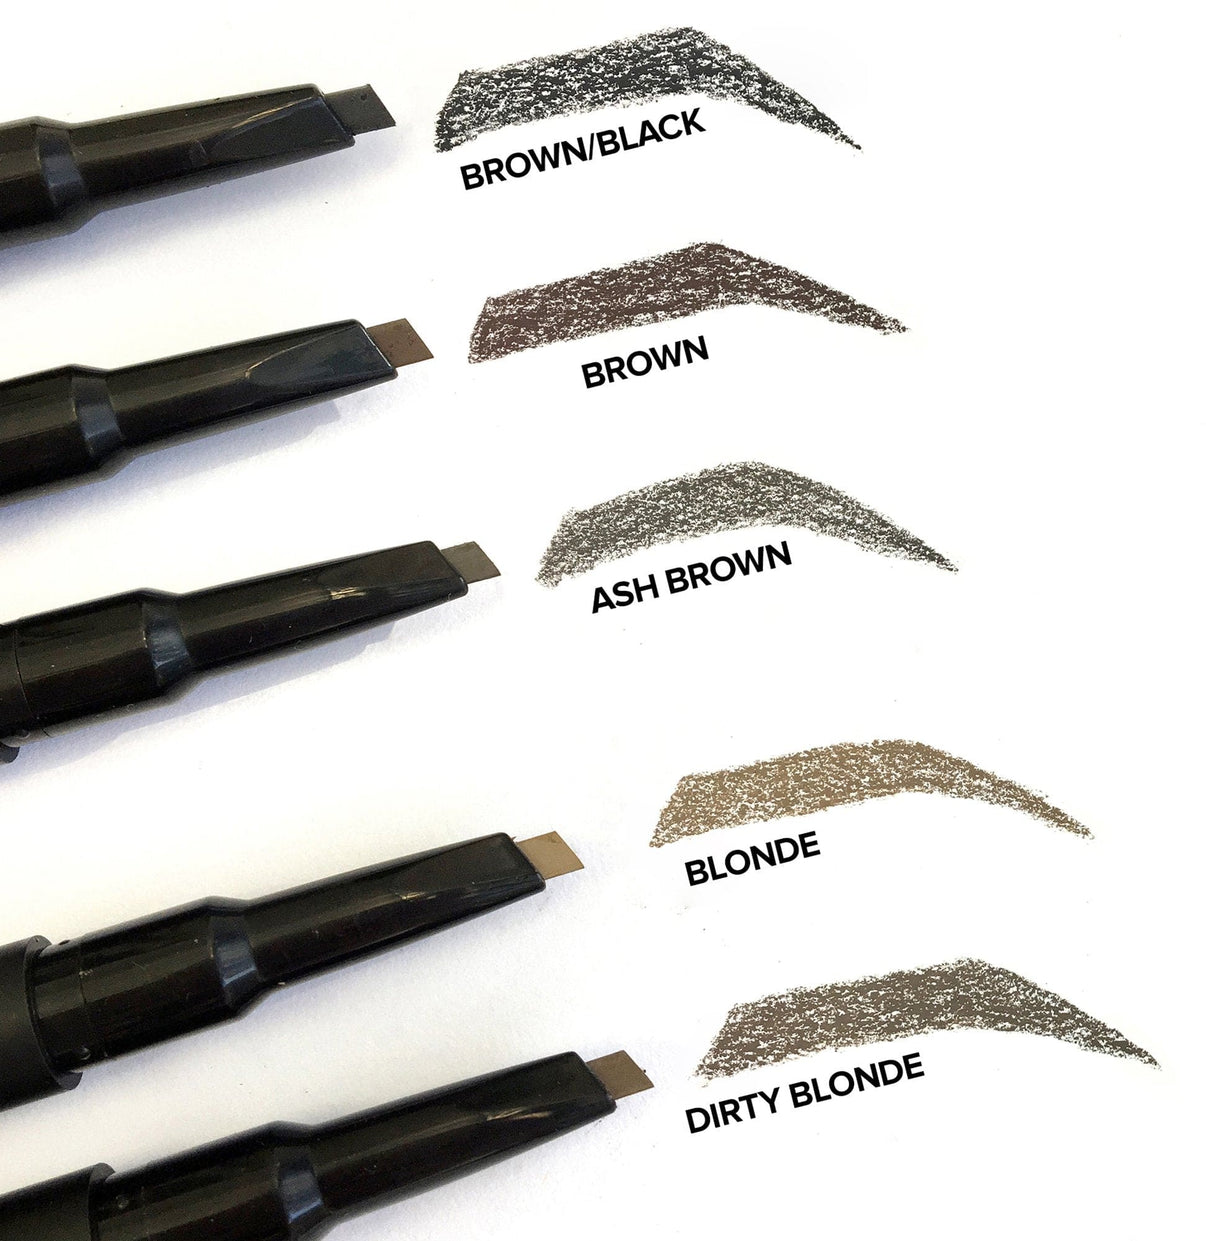 Stylus Eyebrow Pencil & Gel with swatches of shades ashbrown blonde brown brownblack dirtyblonde